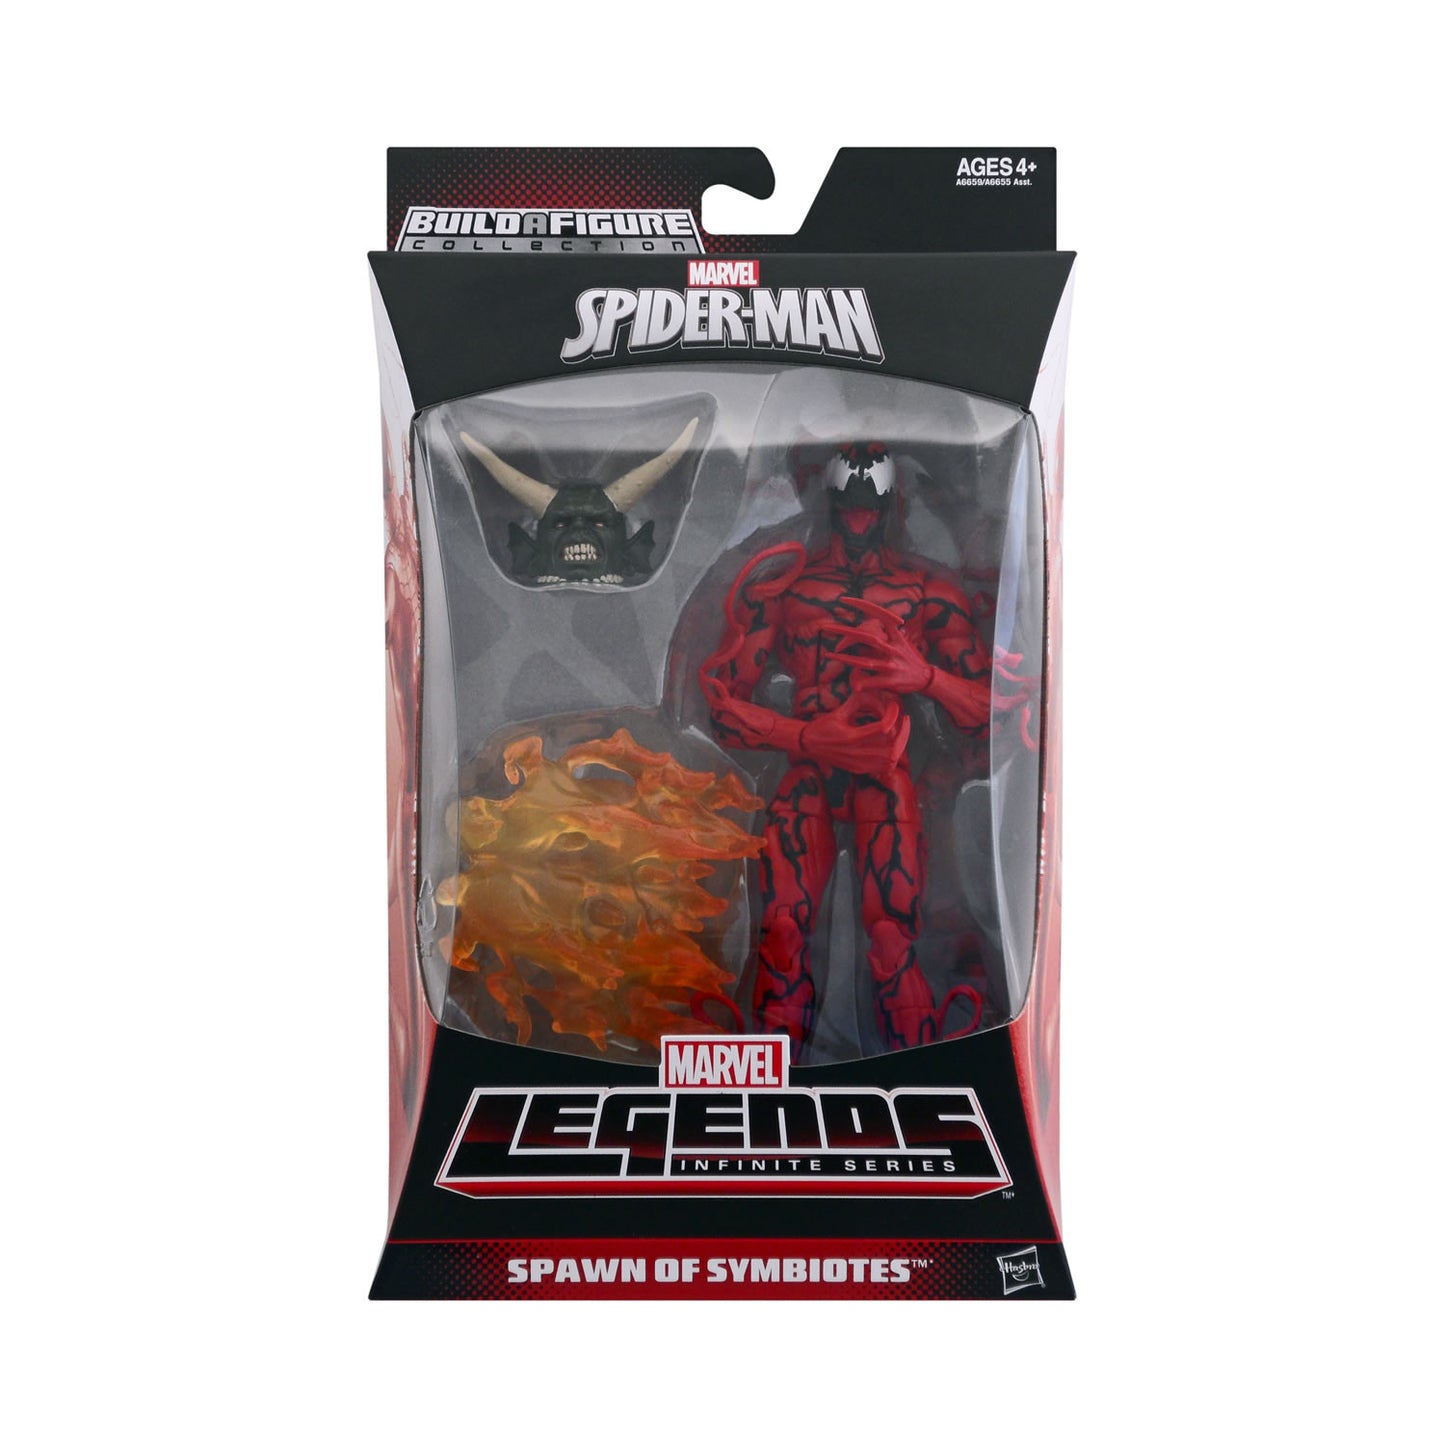 Marvel Legends Infinite Series Spawn of Symbiotes Carnage 6-Inch Action Figure